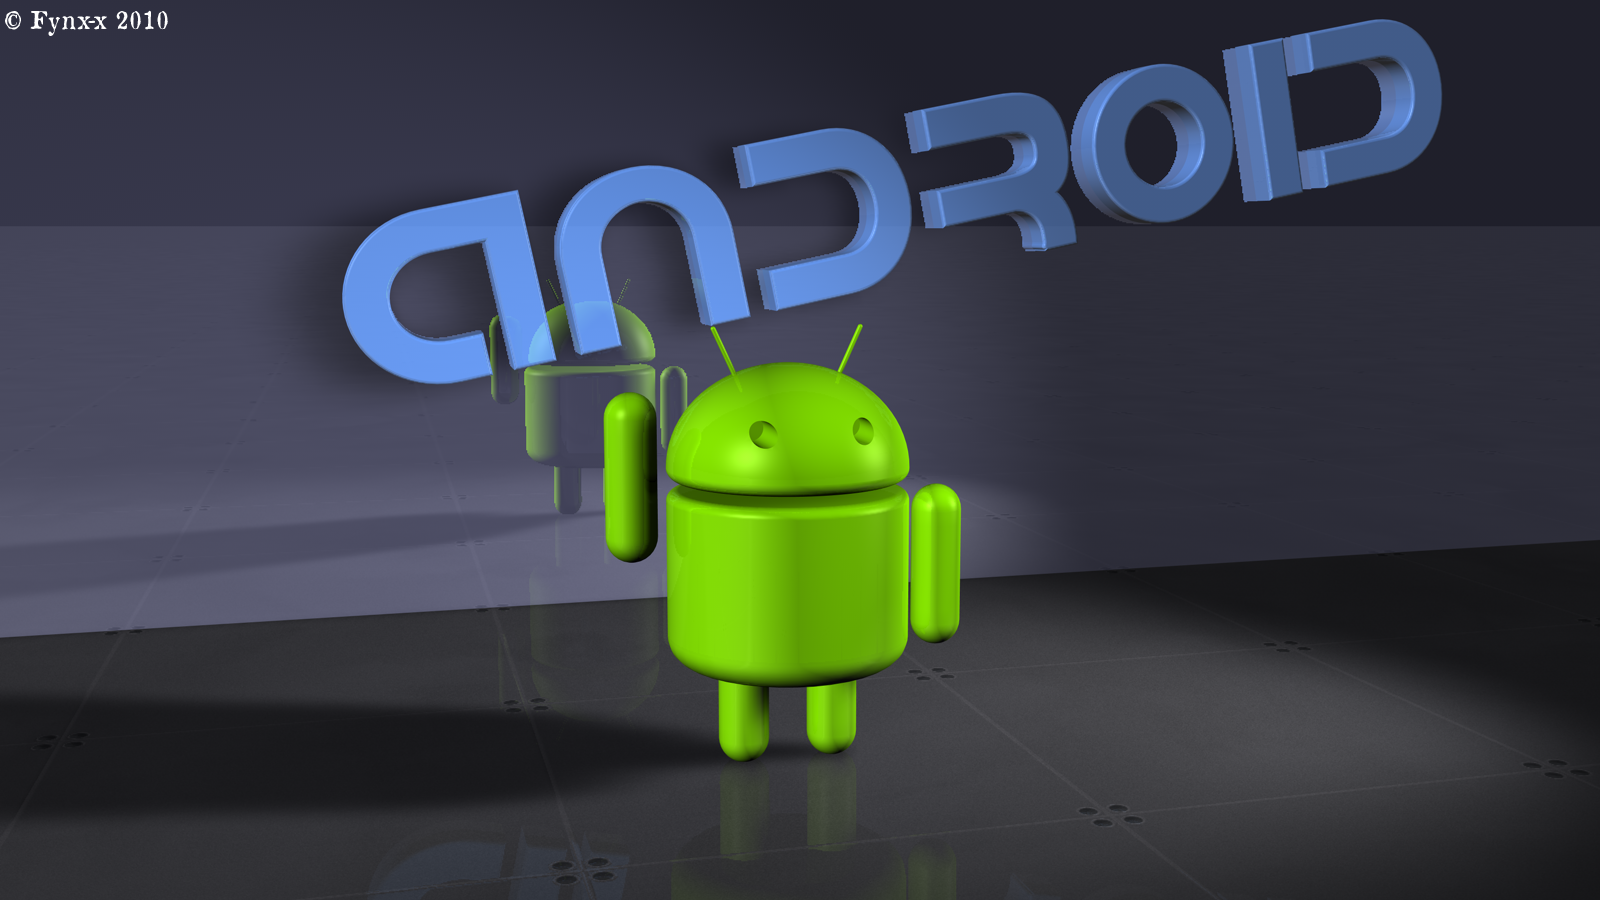 Download: Android 4.2 Wallpapers ~ iSozial